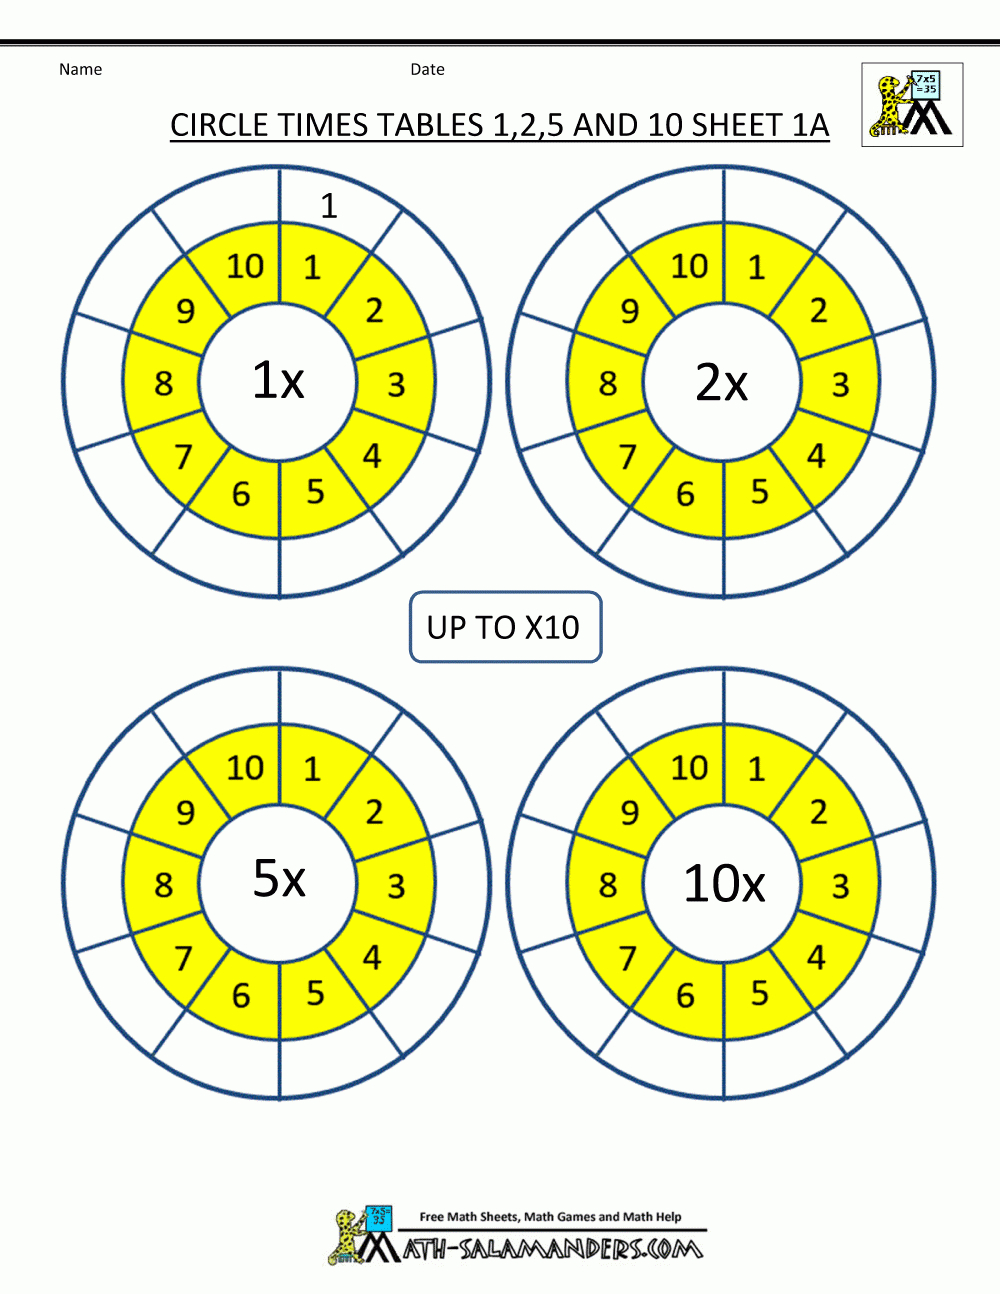 Times Tables Worksheets Circles 1 To 10 Times Tables within Printable Multiplication Table 1-10 Pdf